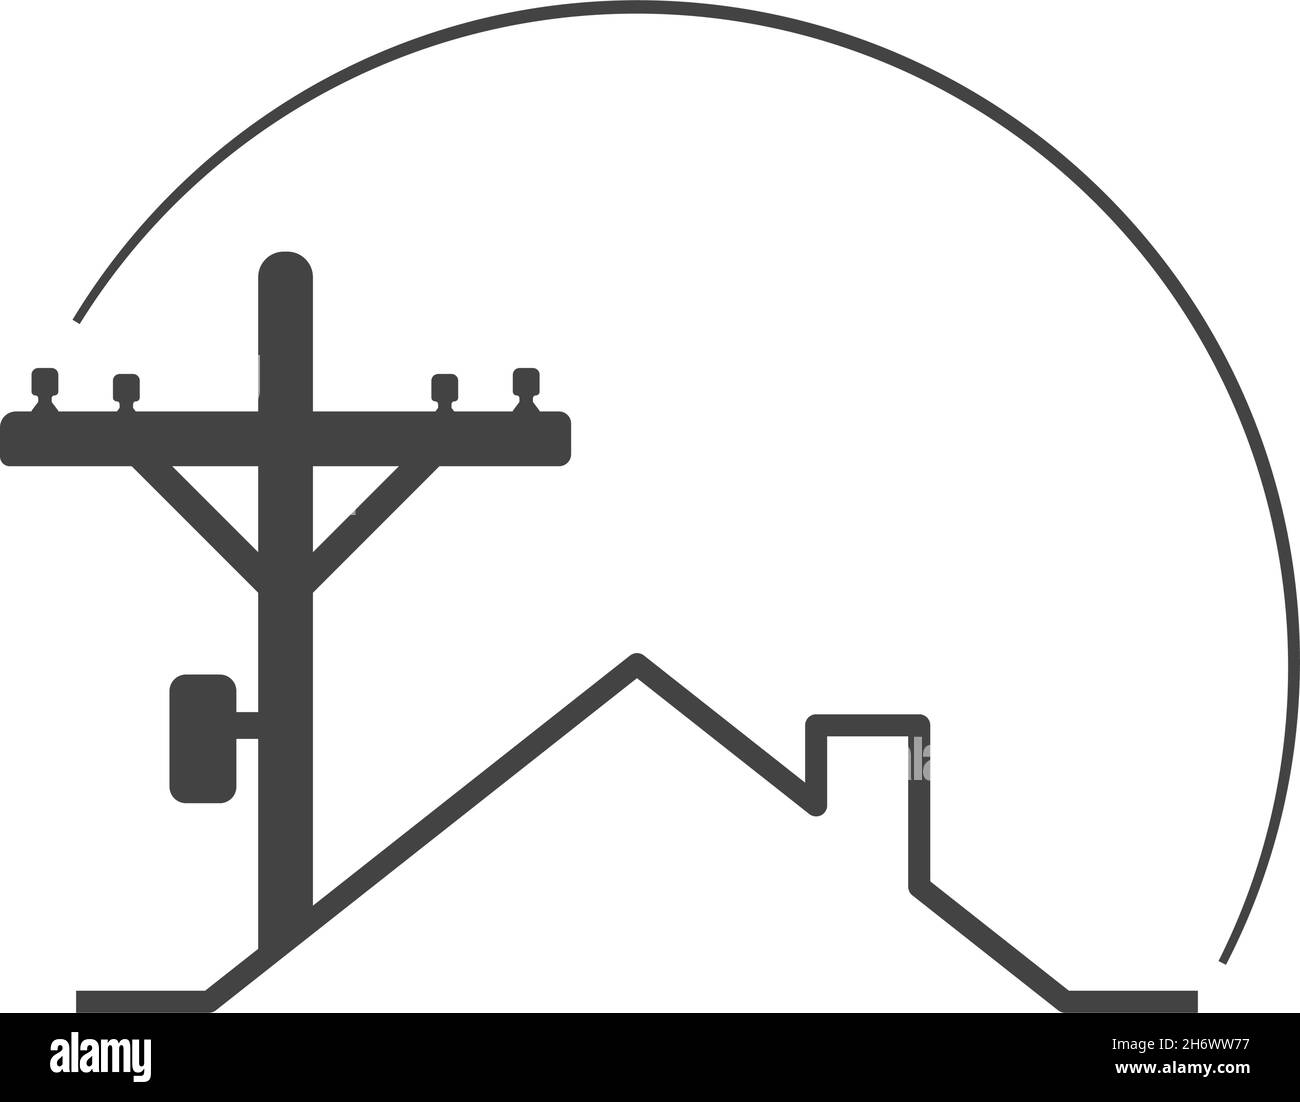 Electric pole and house rooftop icon. Flat style. Isolated on white background. Stock Vector